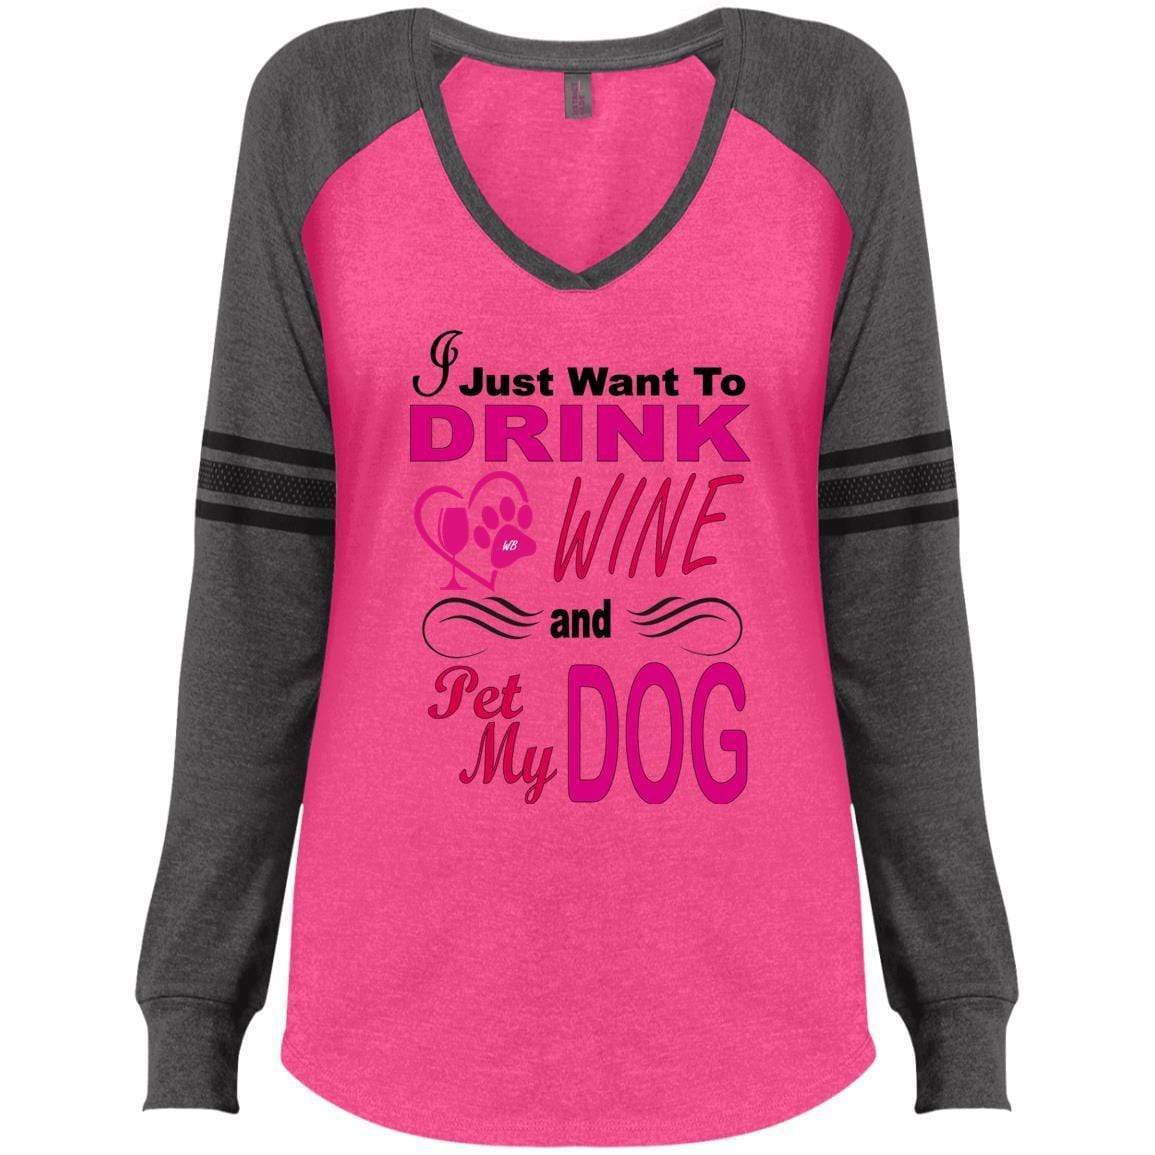 T-Shirts Heathered Dark Fuchsia/Heathered Charcoal / X-Small WineyBitches.co Hilariously Funny "I Just Want To Drink Wine & Pet My Dog" V-neck WineyBitchesCo